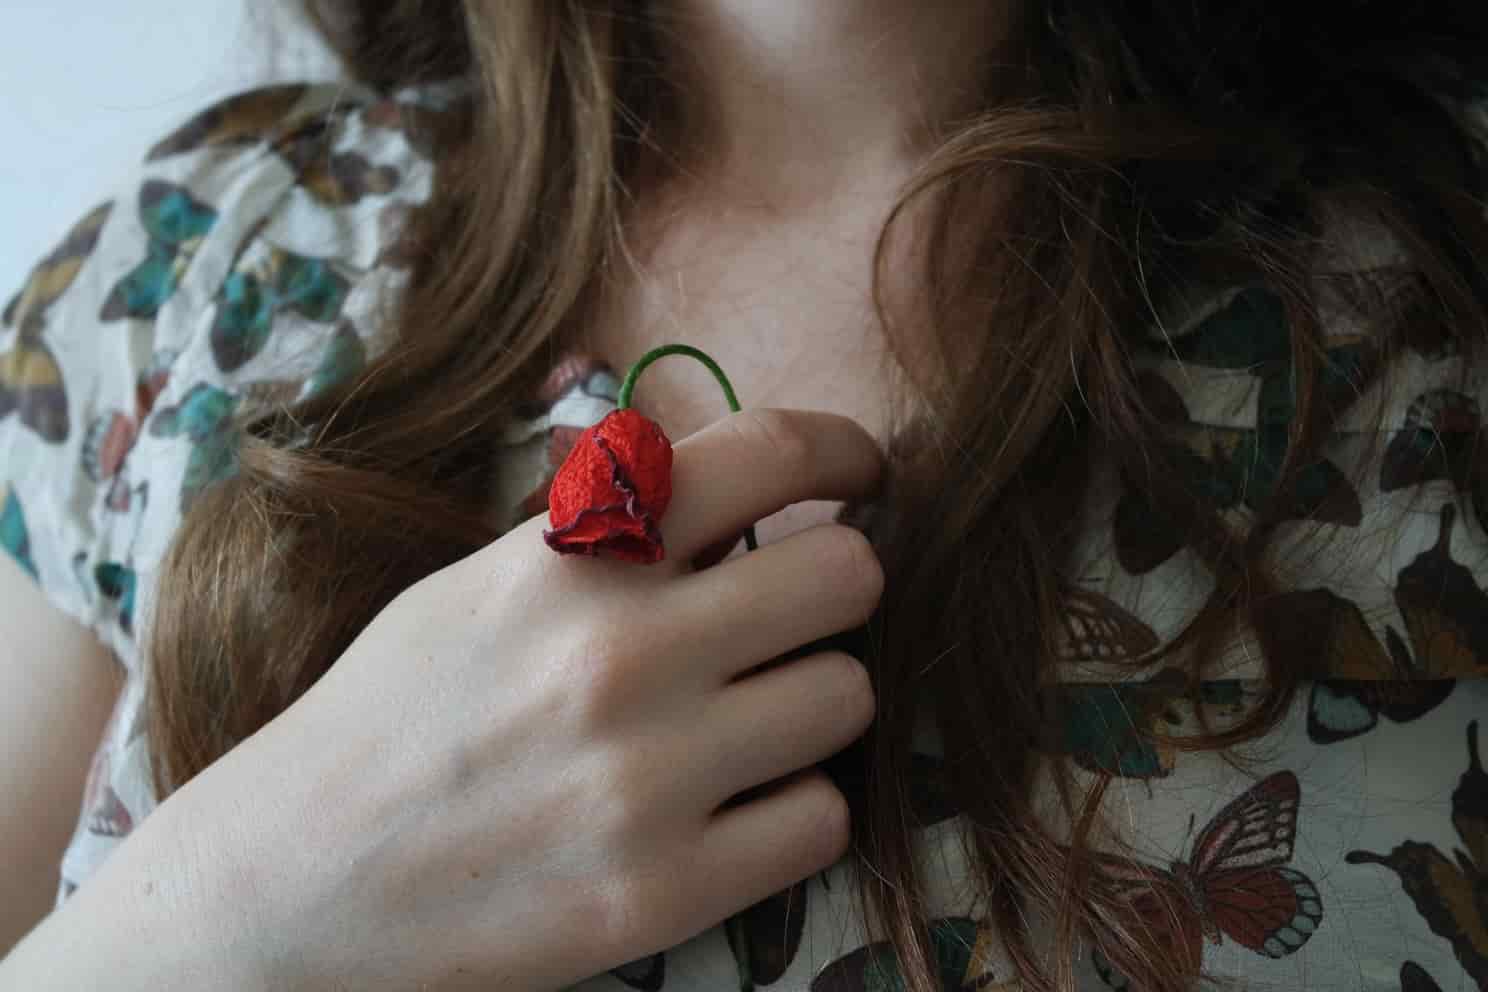 Wilted rose in hand